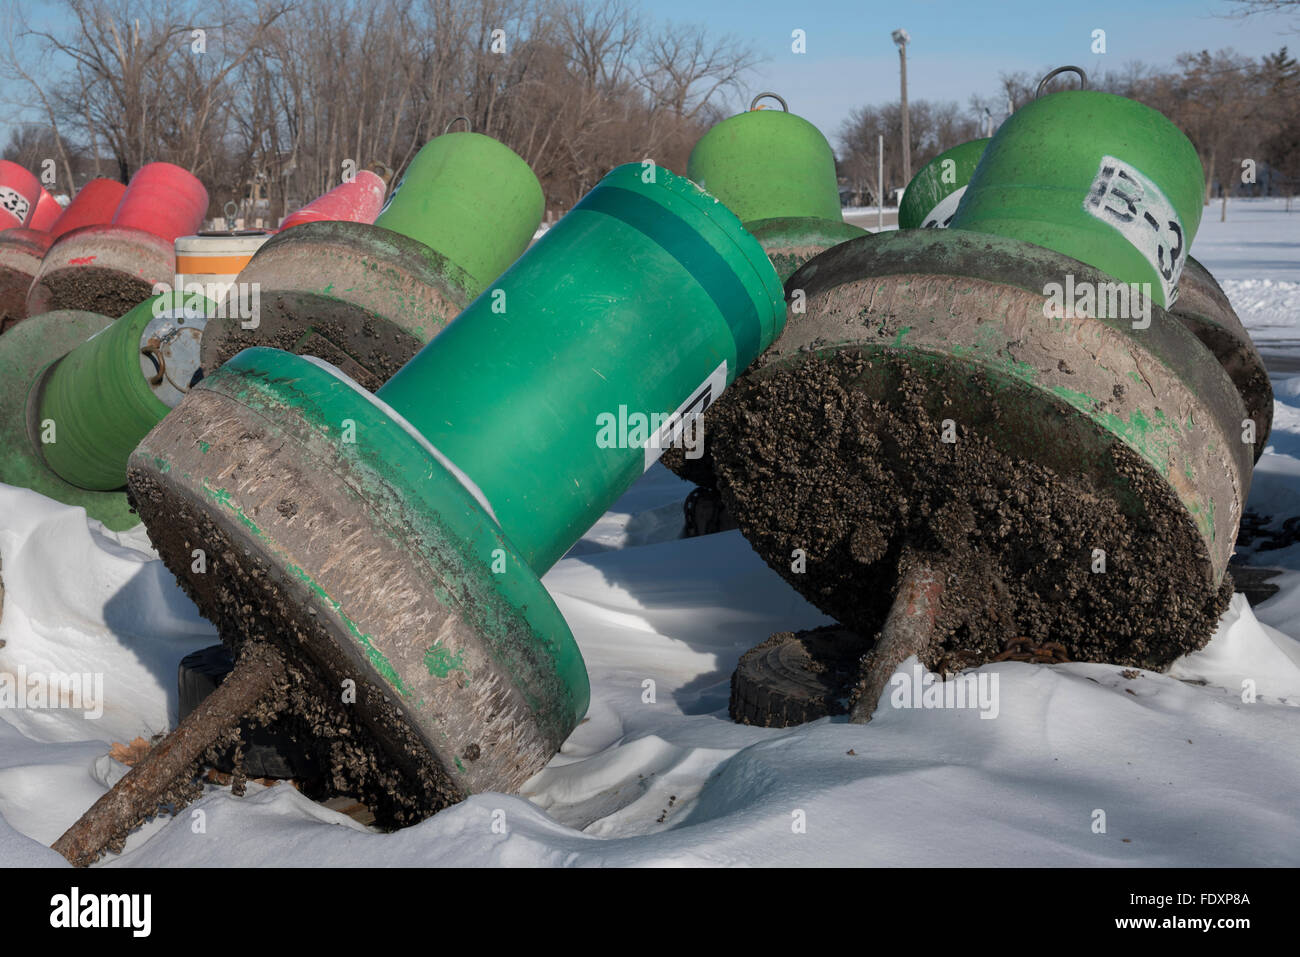 Colorful red and green buoys laying shore in the winter.  The bottom of the buoys are covered in invasive Zebra Mussels Stock Photo